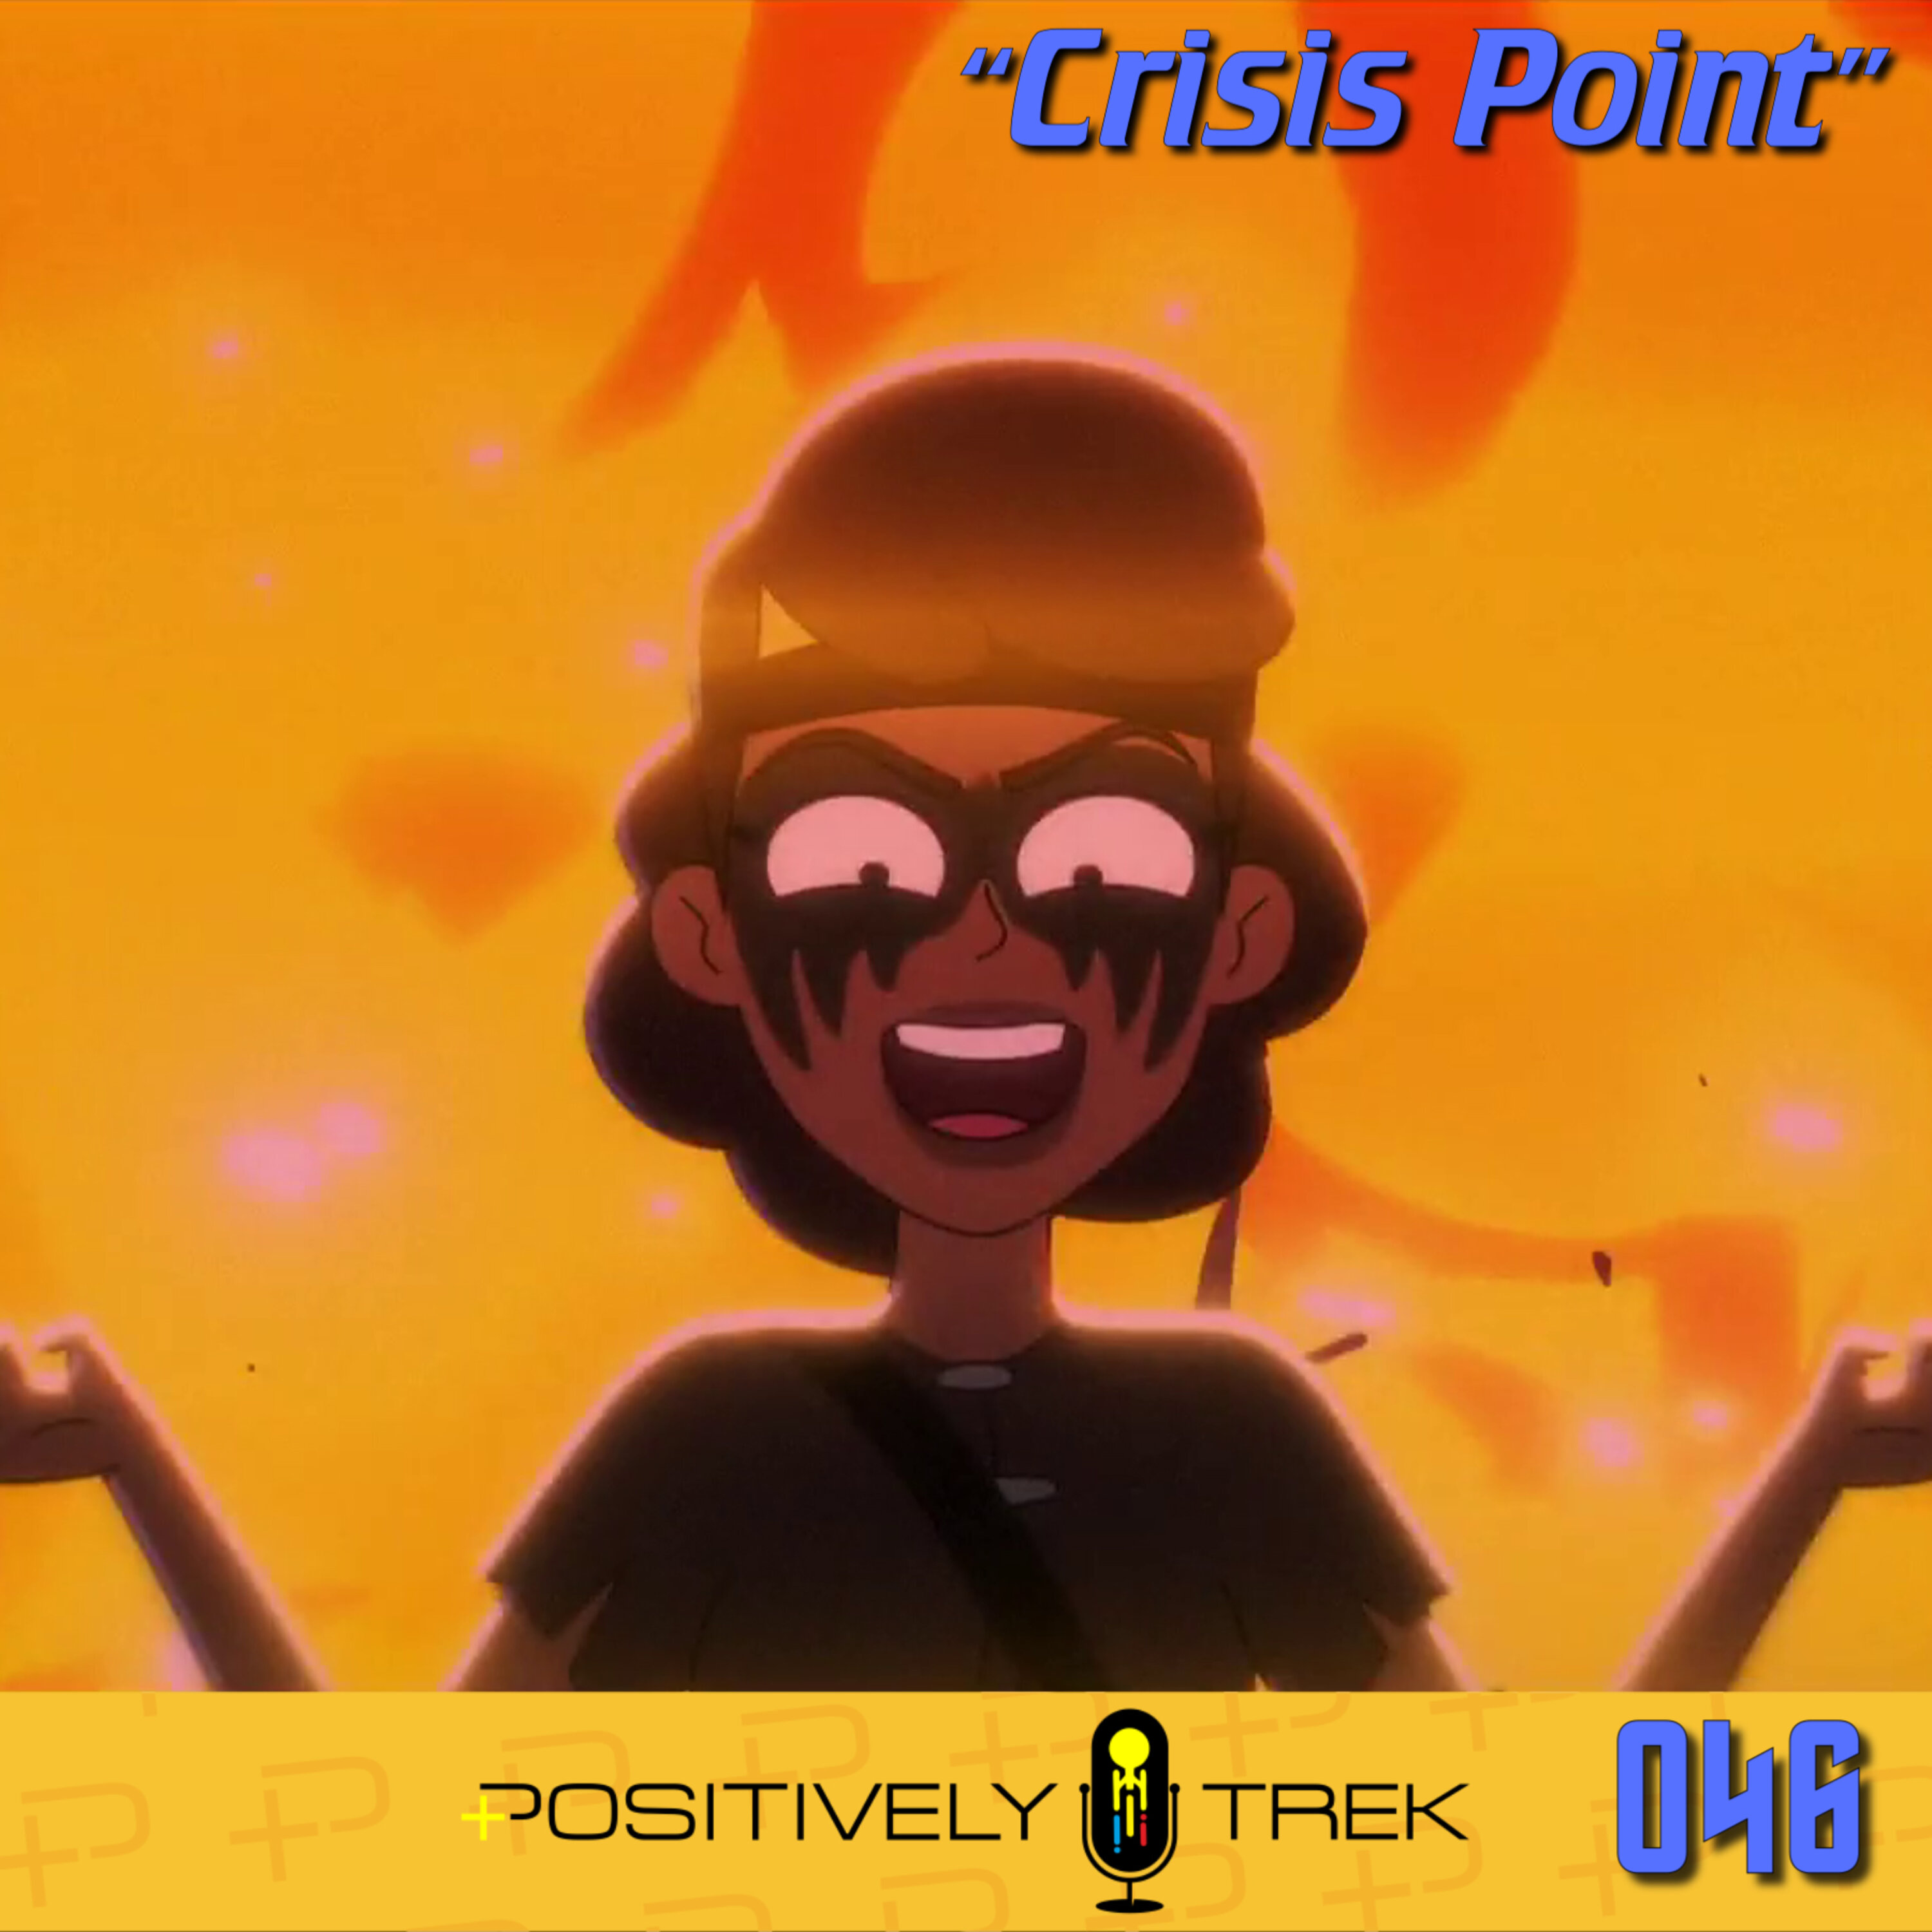 Lower Decks Review: “Crisis Point” (1.09)